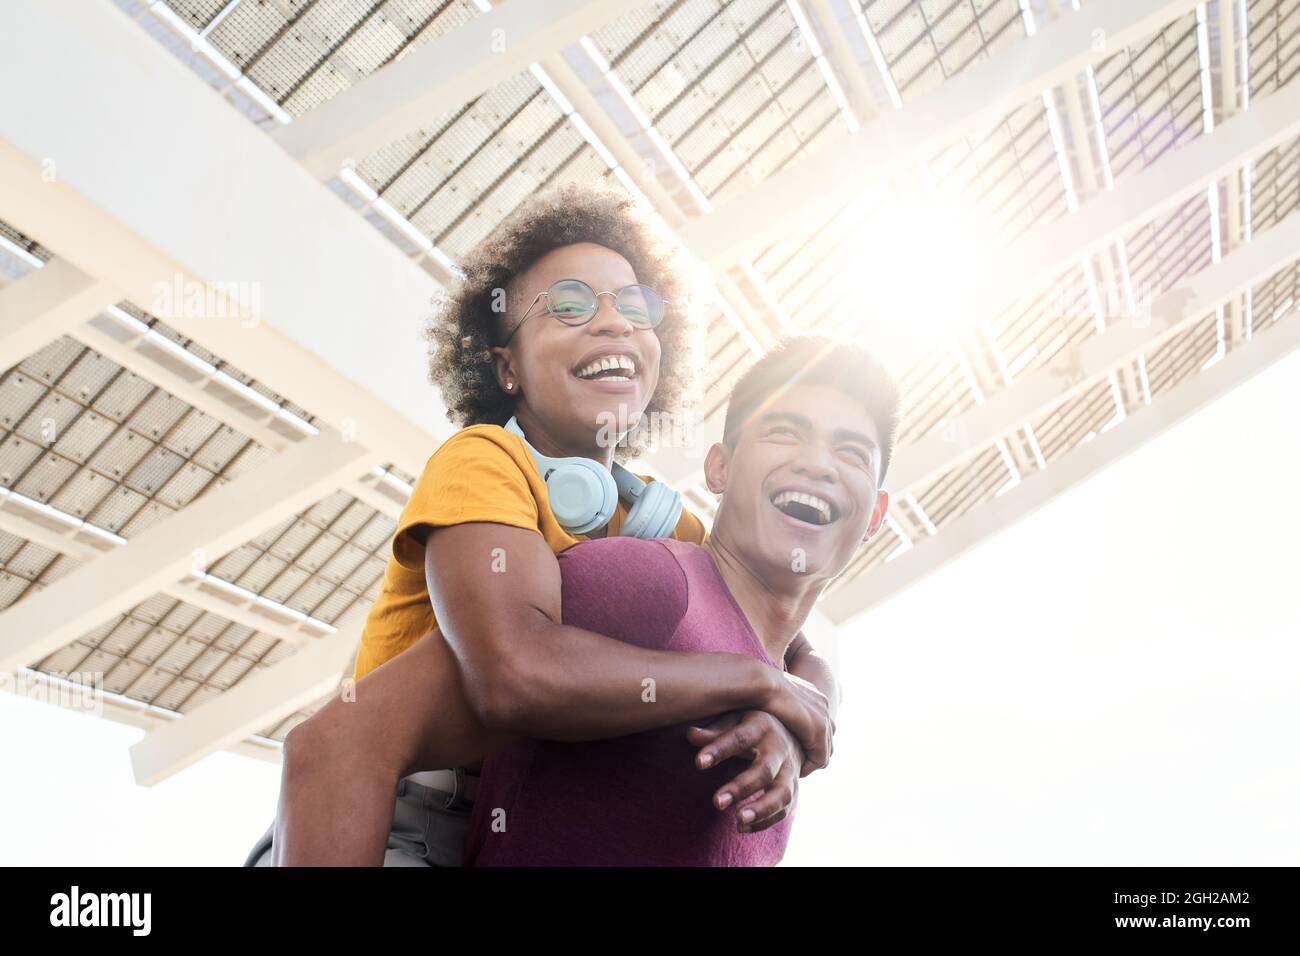 Young smiling lovers looking at the camera. The girl is piggyback on her boyfriend. Concept of friendship and couple relationship having fun. Stock Photo